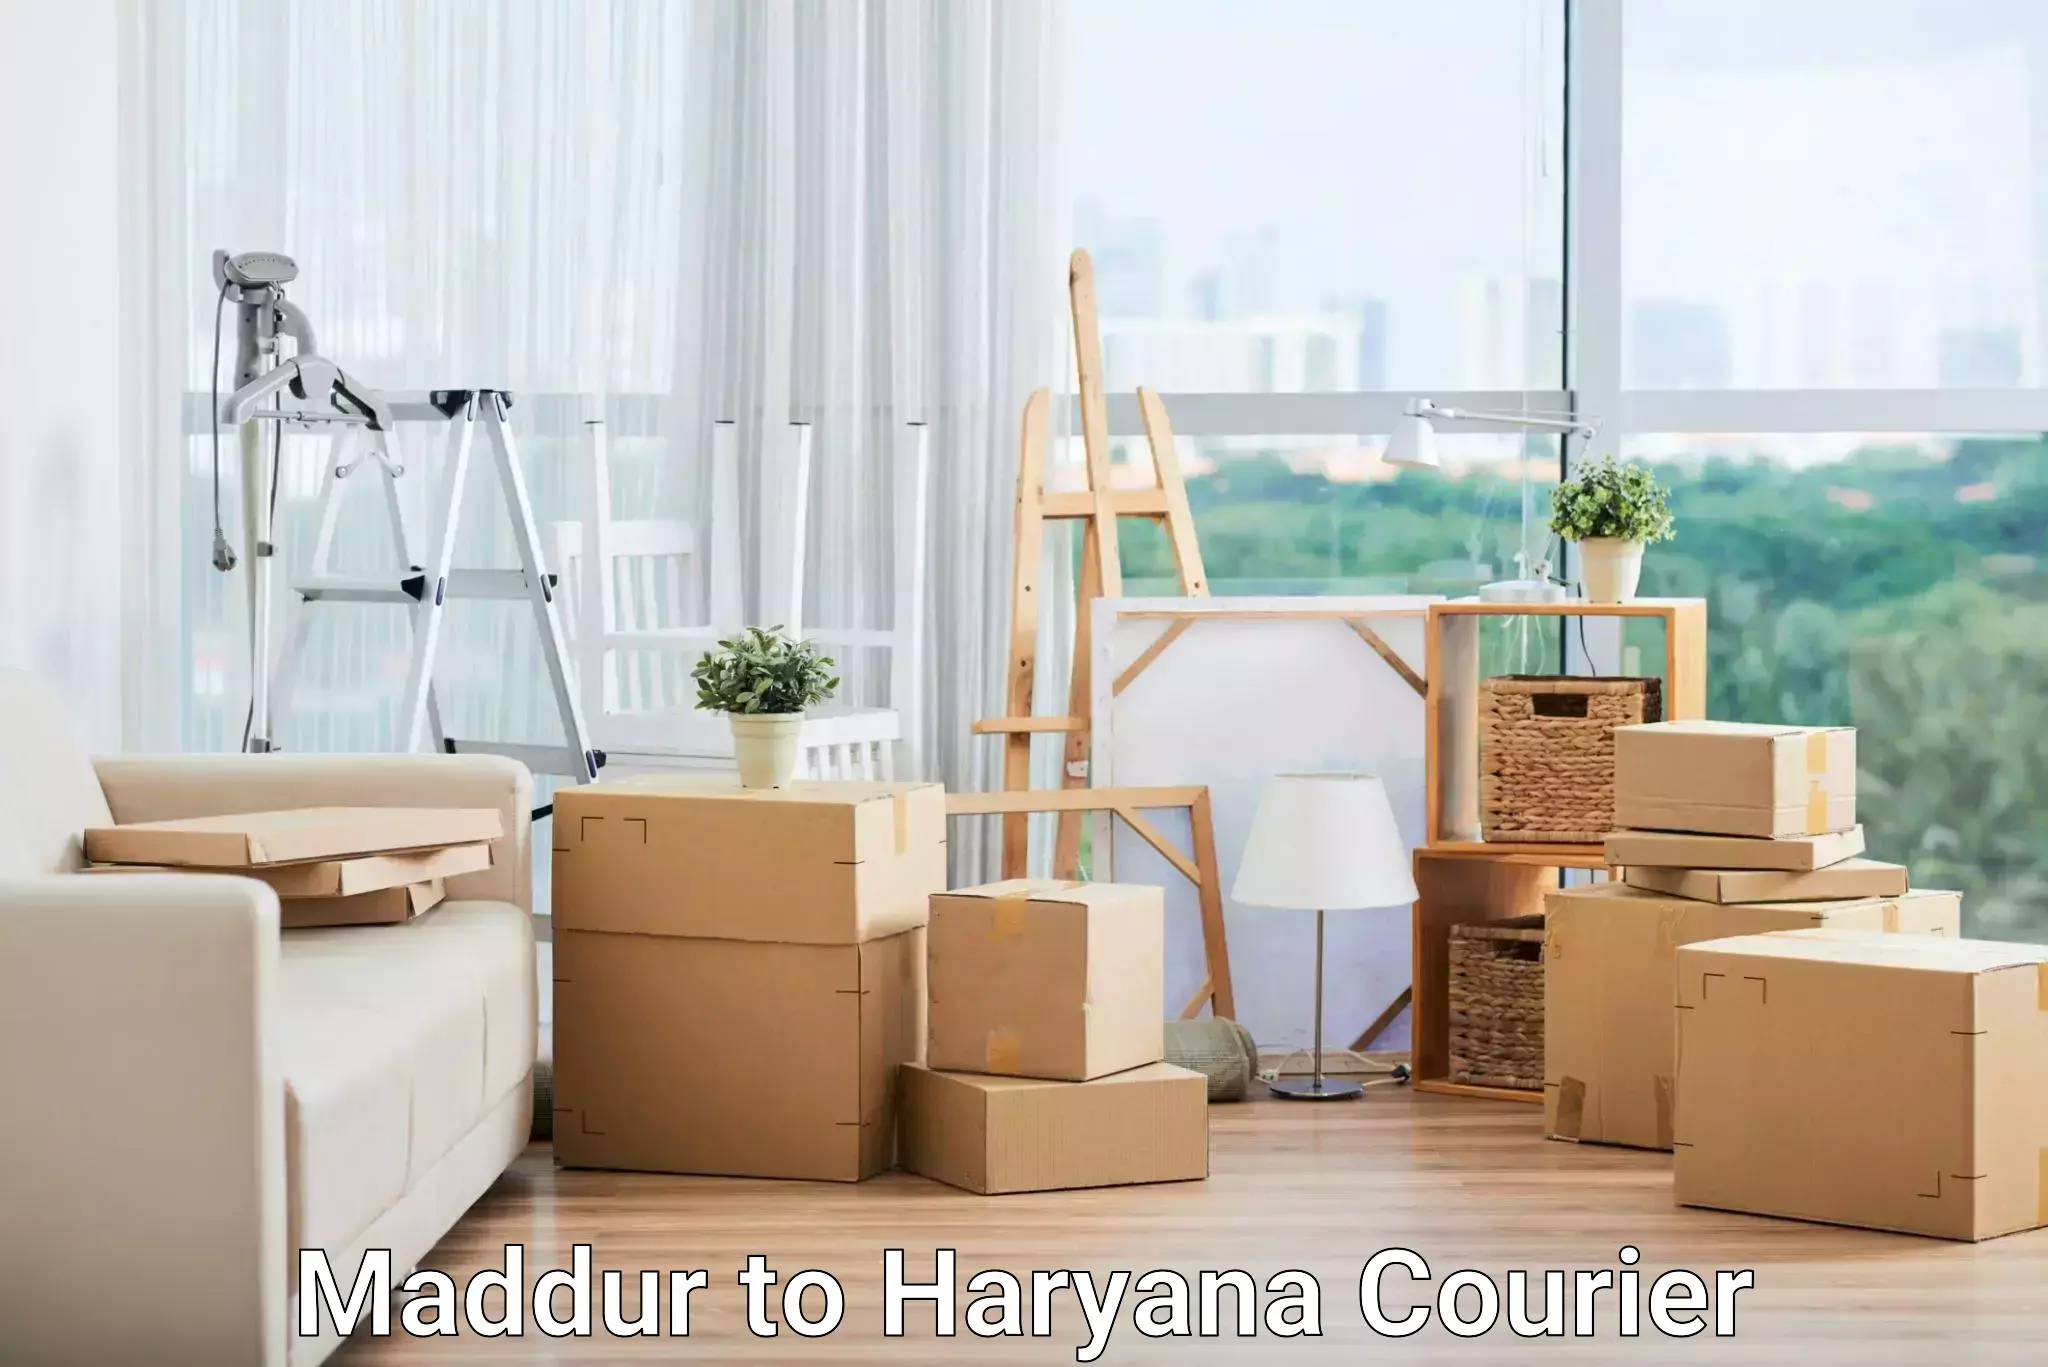 Courier service partnerships Maddur to NCR Haryana